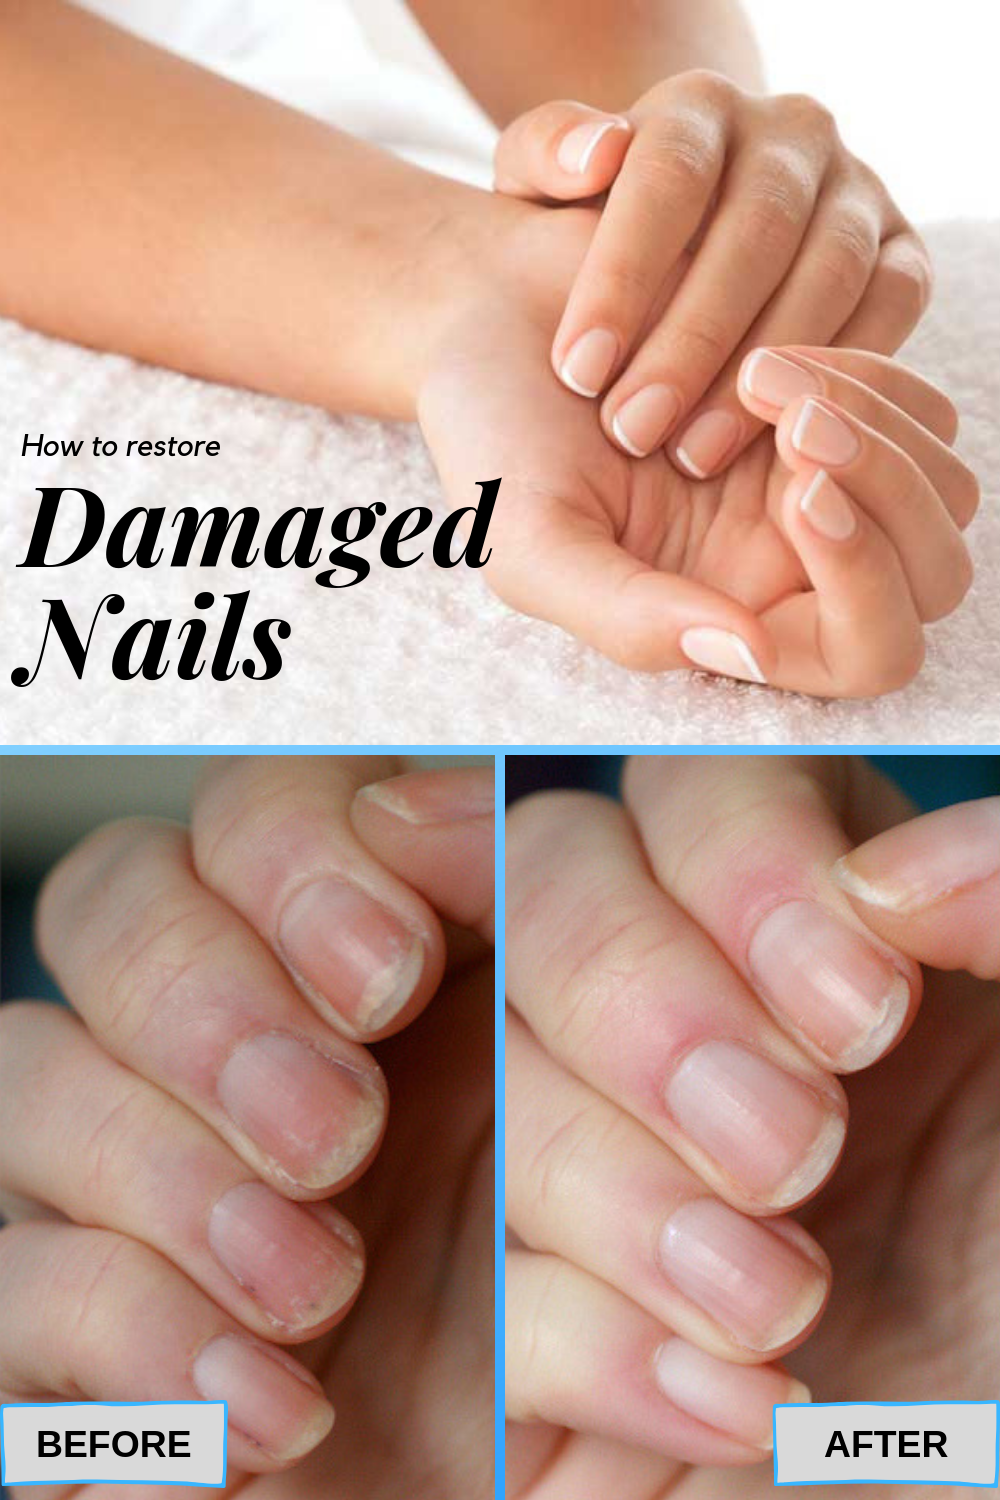 Expert Tips to Damaged Nails